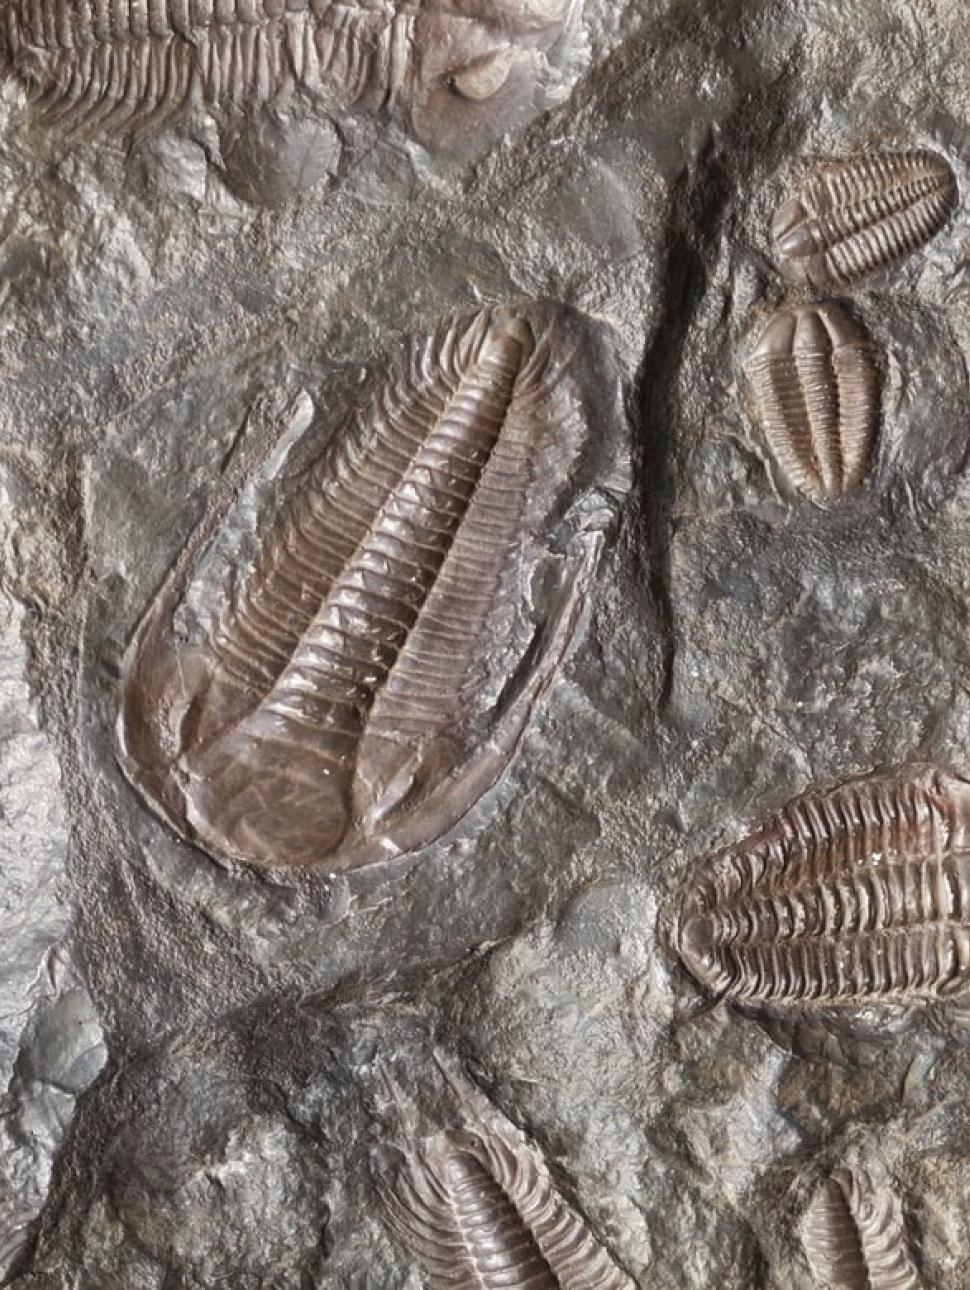 Image shows a large piece of rock containing various imprints of trilobite fossils